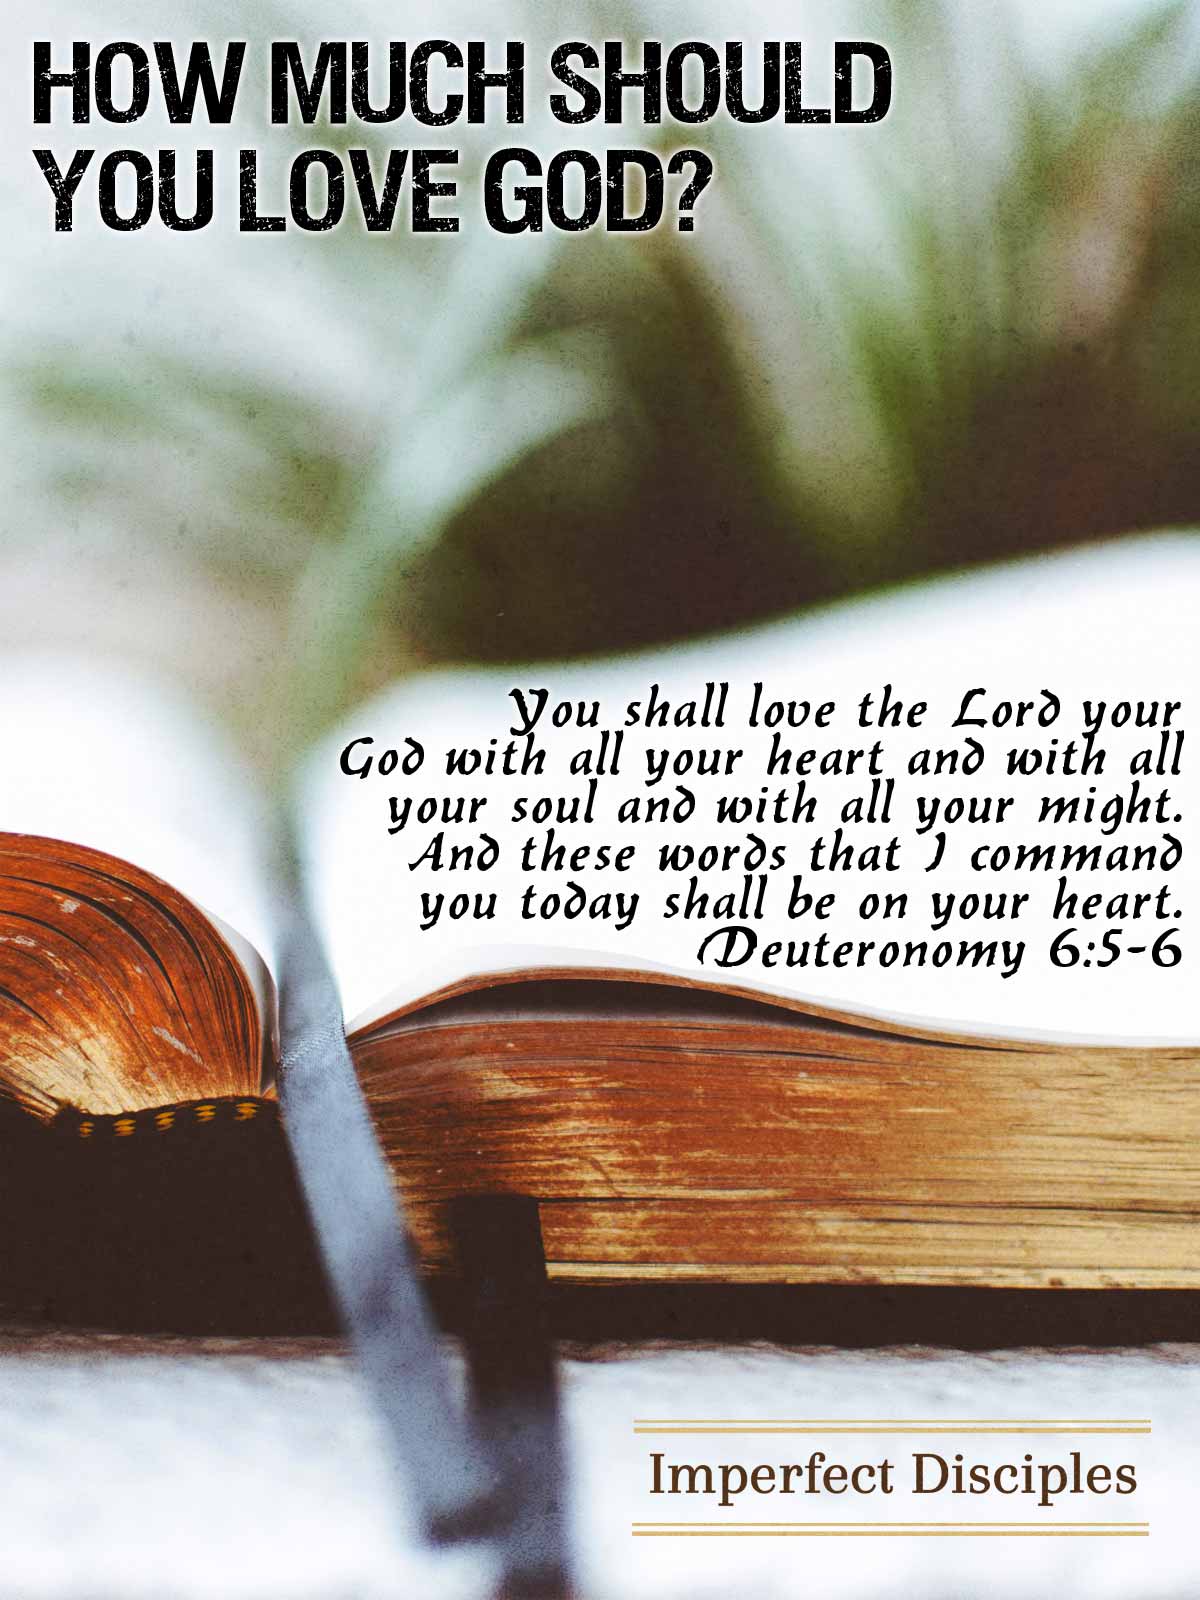 How Much Should You Love God? - Deuteronomy 6:5-6 Scripture Memory Song